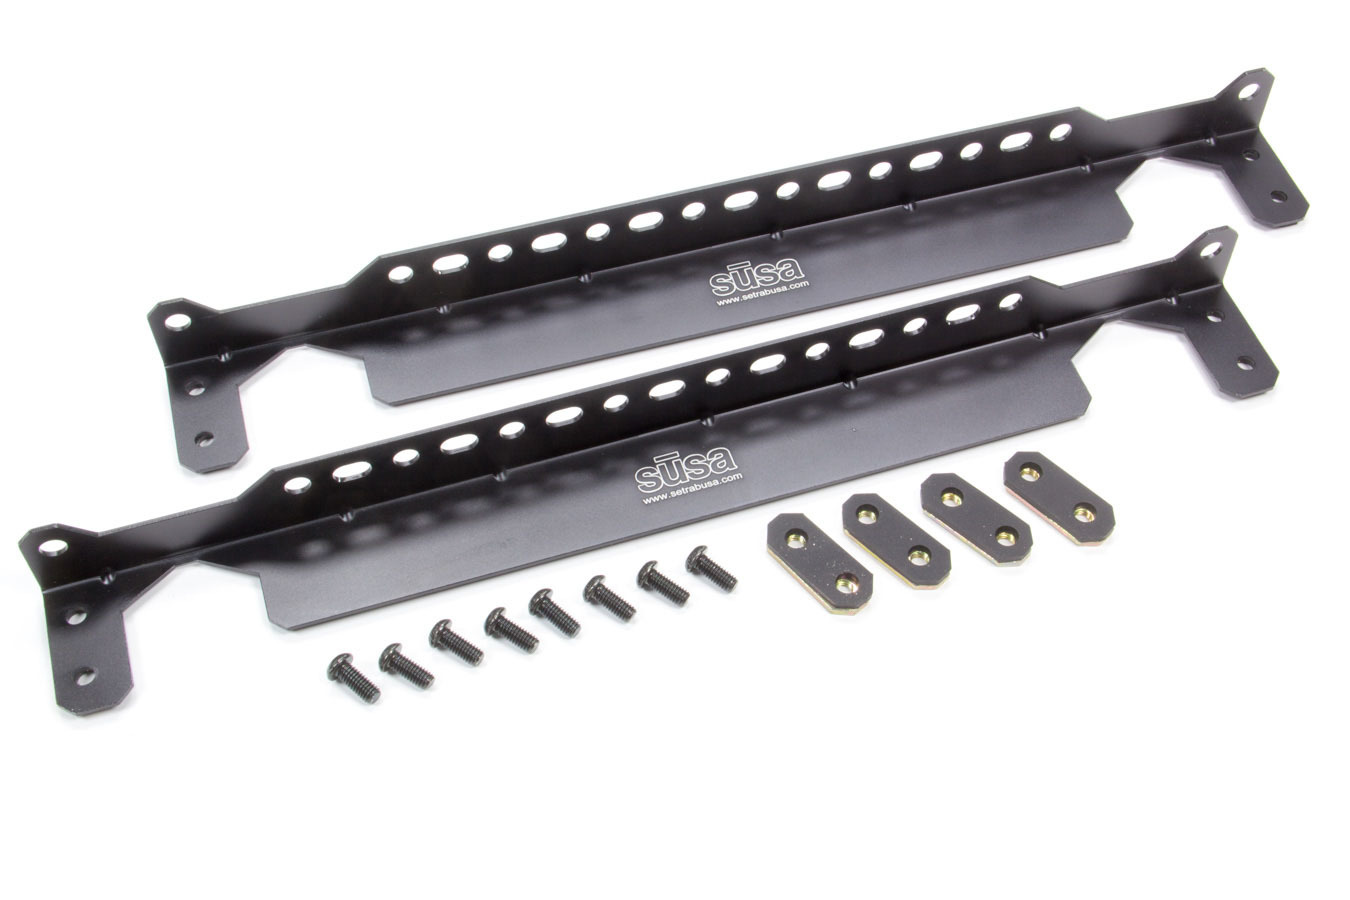 Setrab 23-6002 SUSA ProLine Mounting Bracket Kit for 6-Series Oil Coolers and Fanpacks 